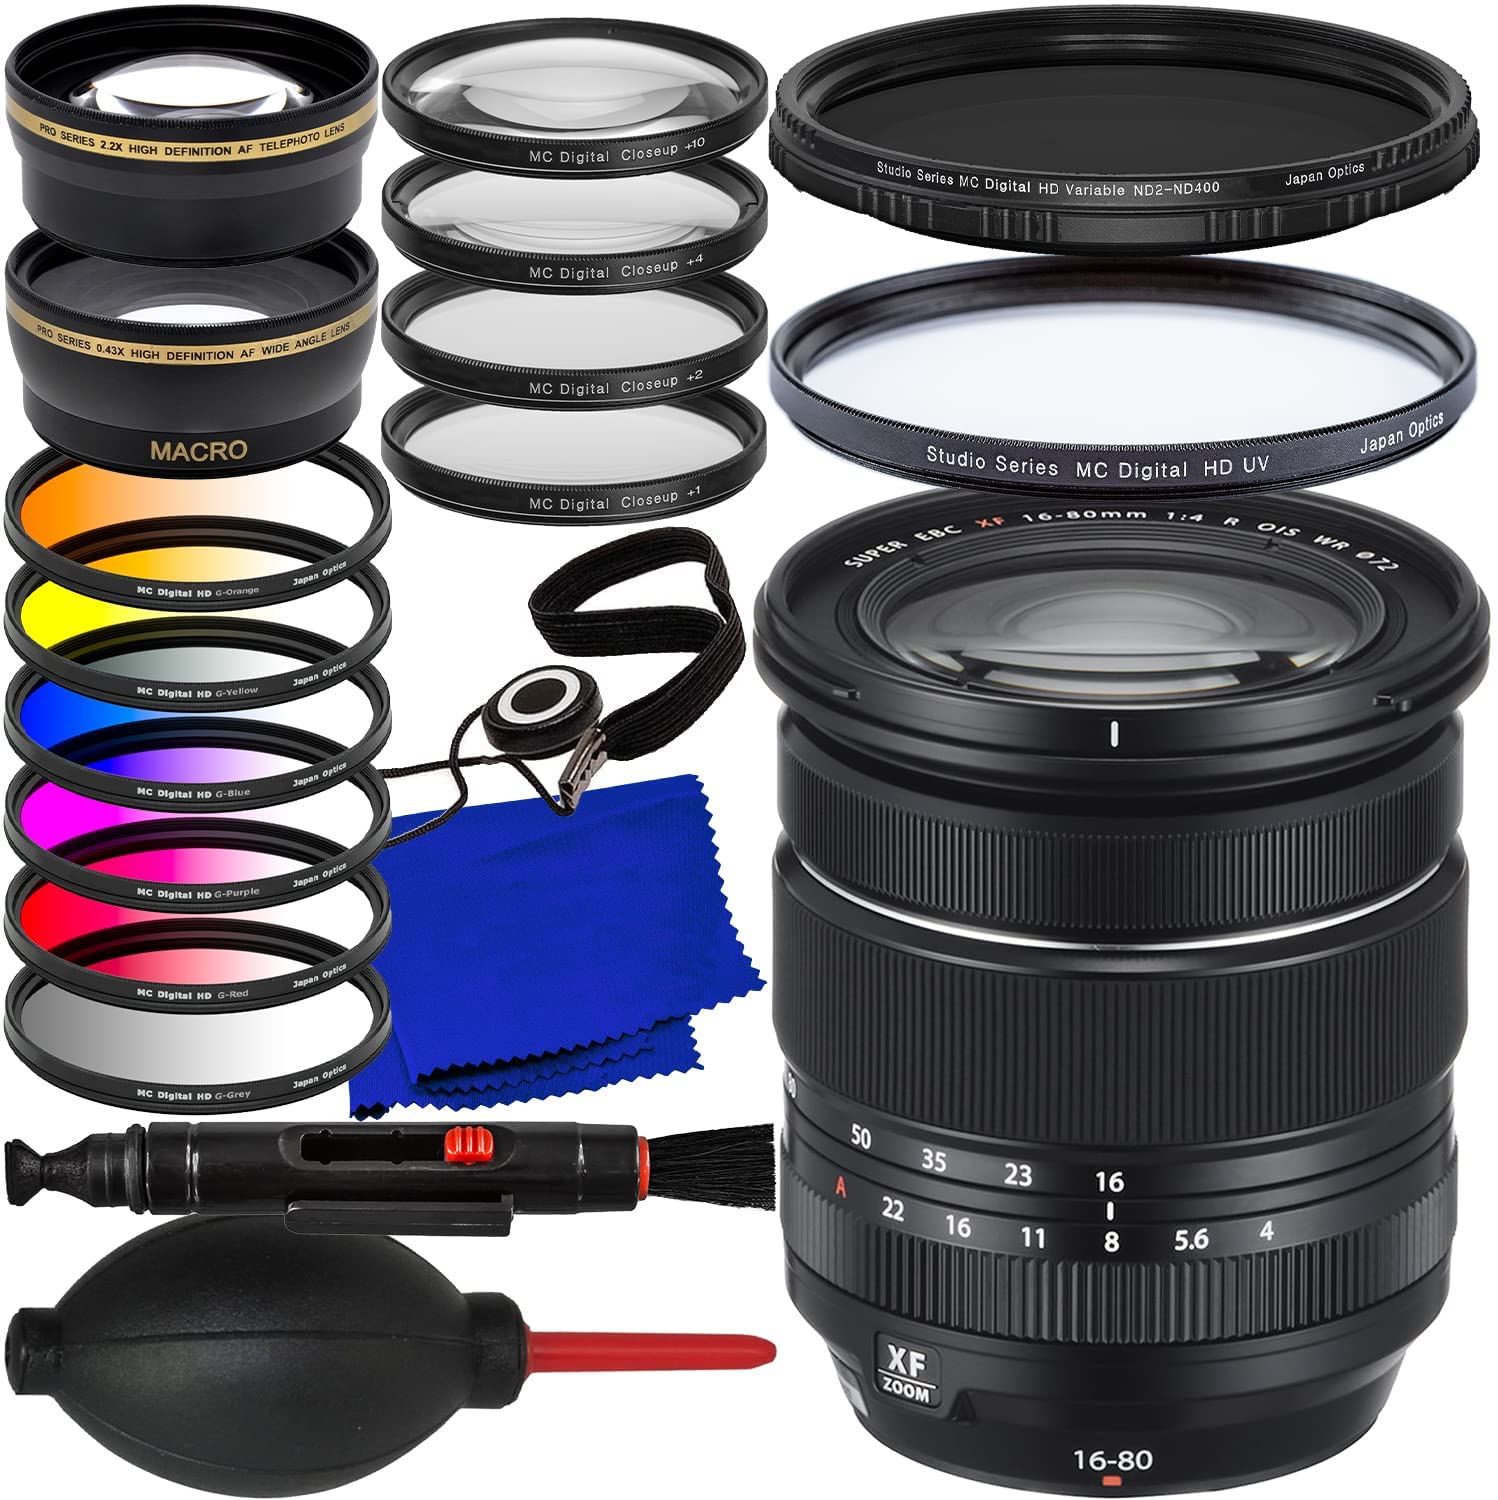 FUJIFILM XF 16-80mm f/4 R OIS WR Lens + 0.43x Wide-Angle Lens Attachment with Detachable Macro, Variable Neutral Density Filter (ND2 - ND400), Protective UV Filter & Much More(23pc Bundle)